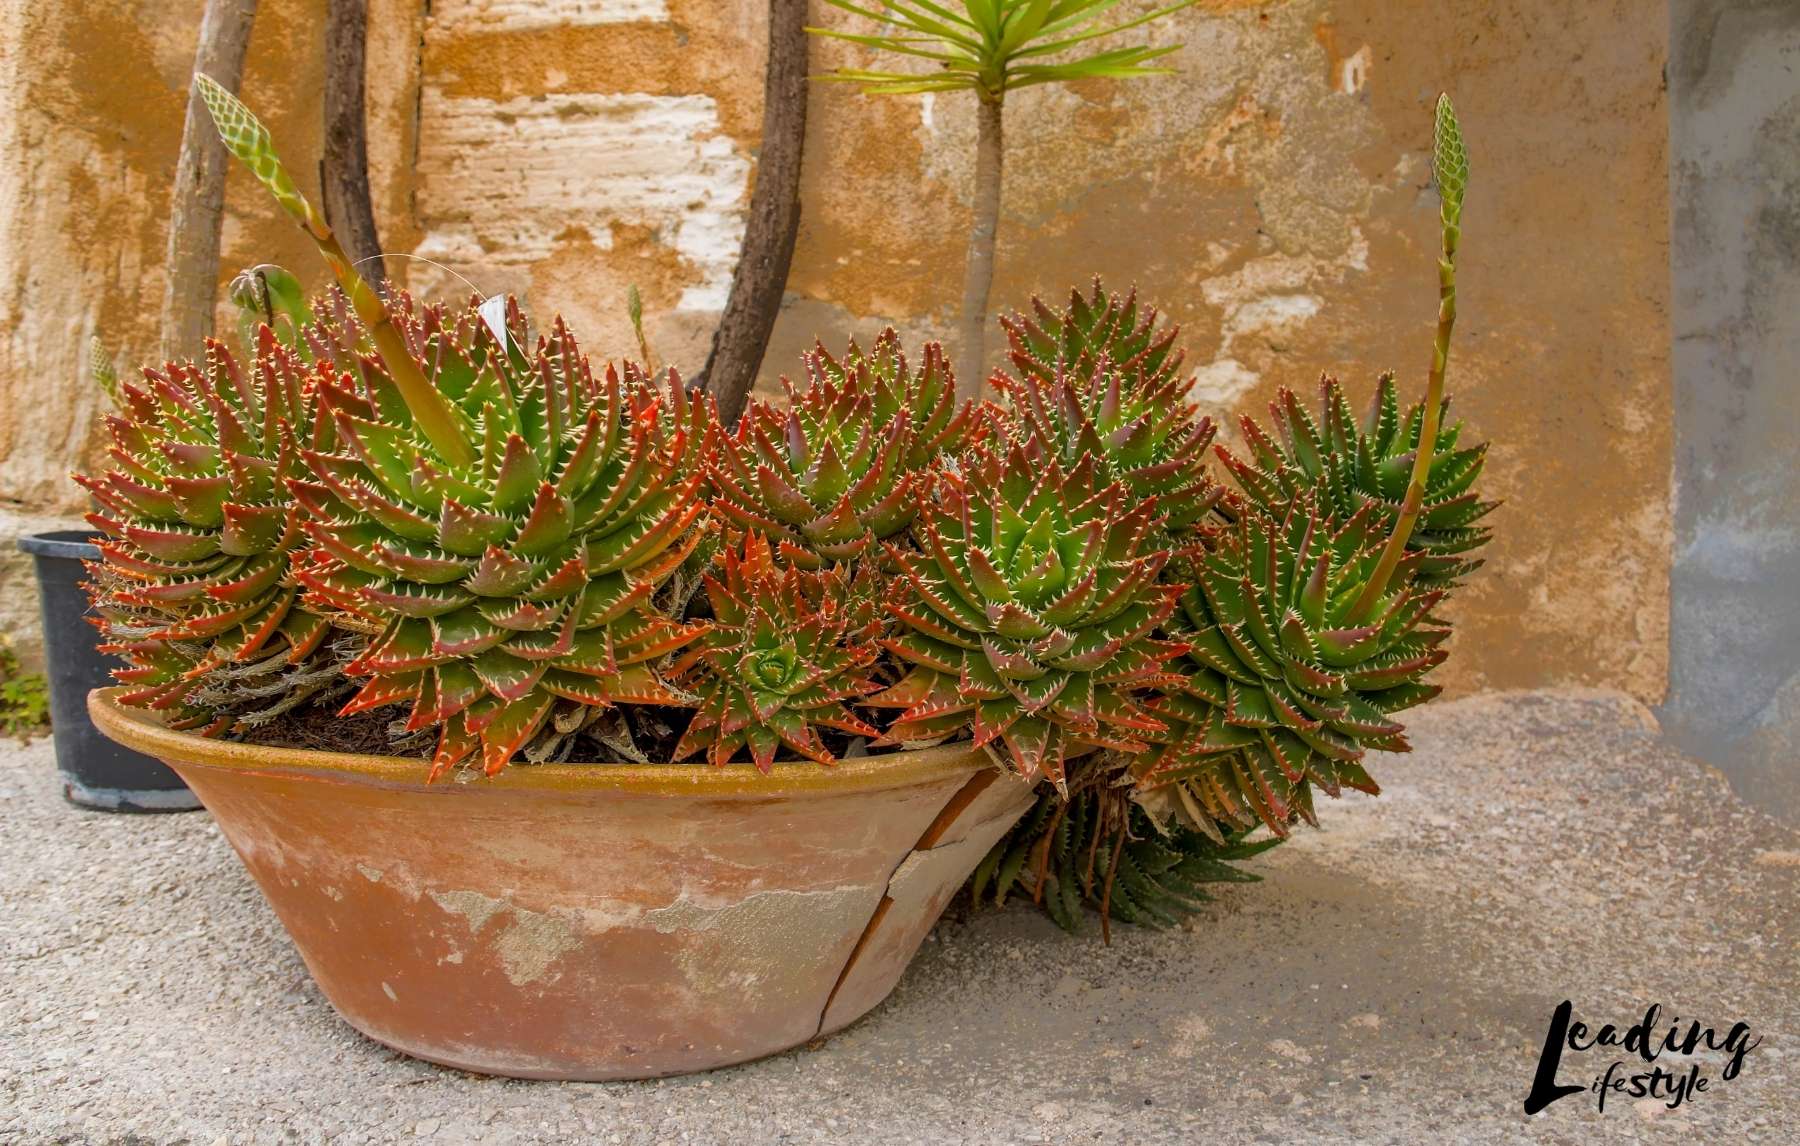 Best-succulents-that-grow-in-shade-Leading-Lifestyle-_-PathosBay.jpg